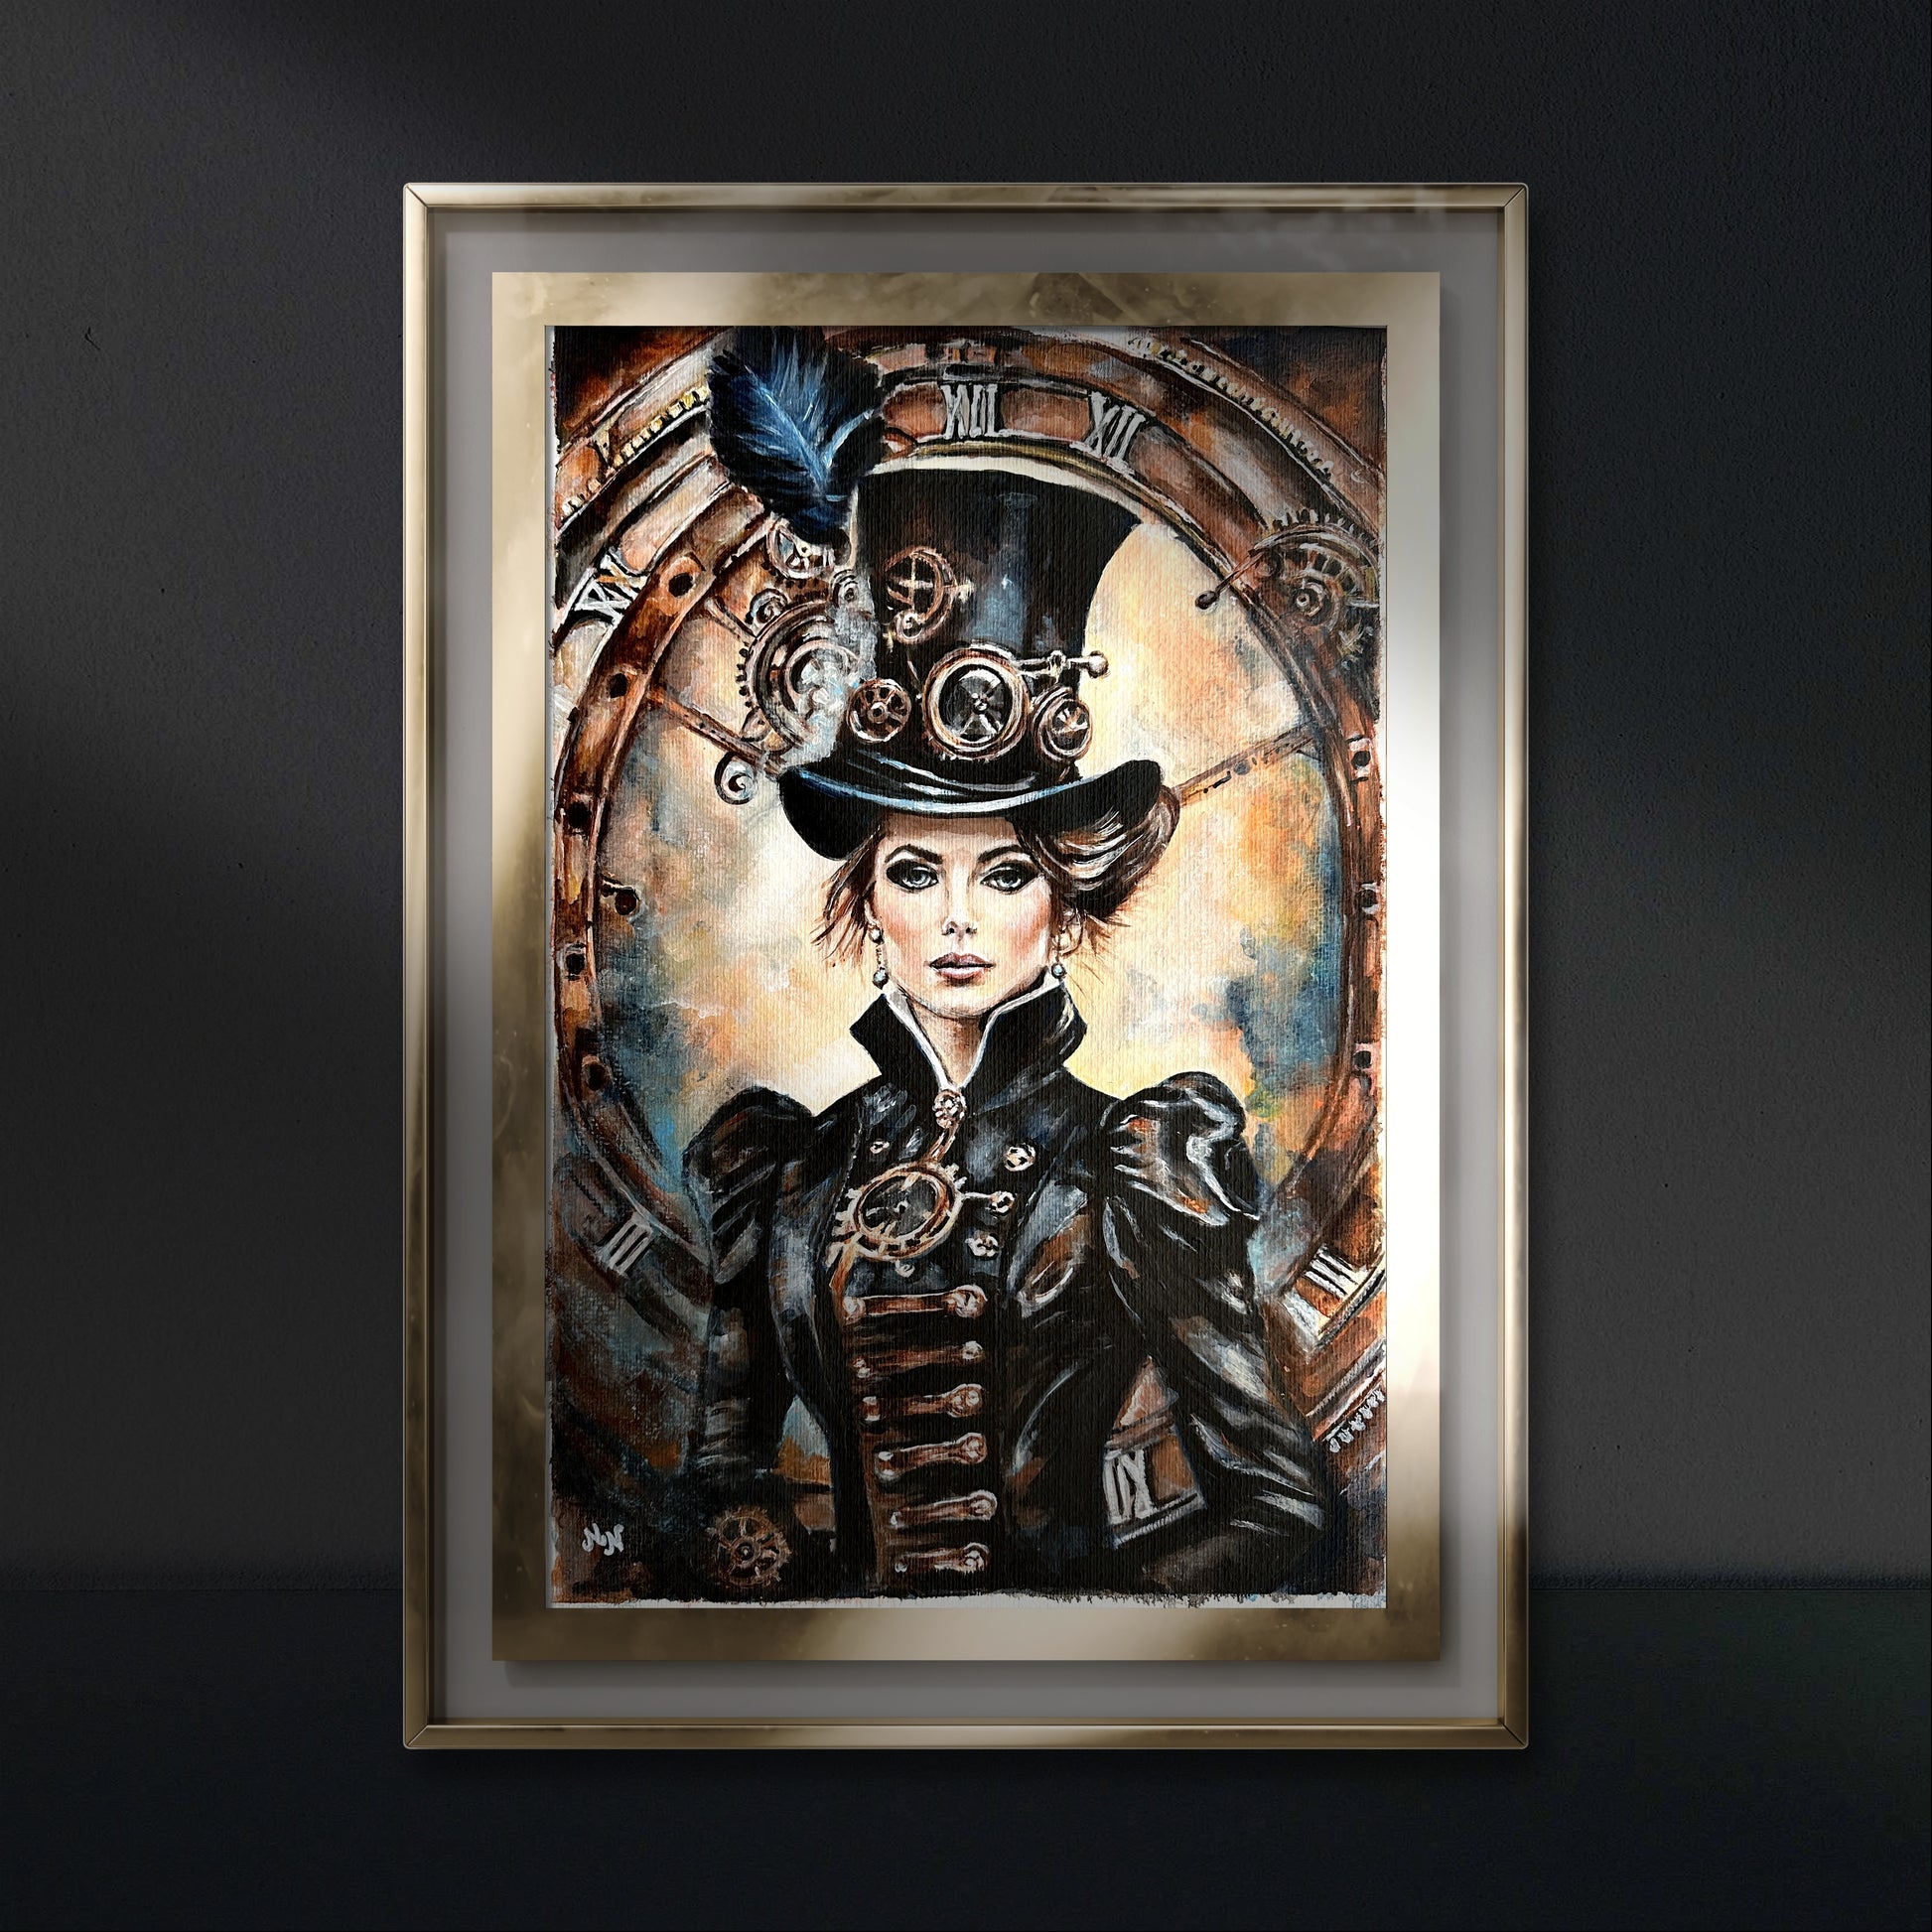 Steampunk Lady: Unique character featuring intricate gear mechanisms and cogs.